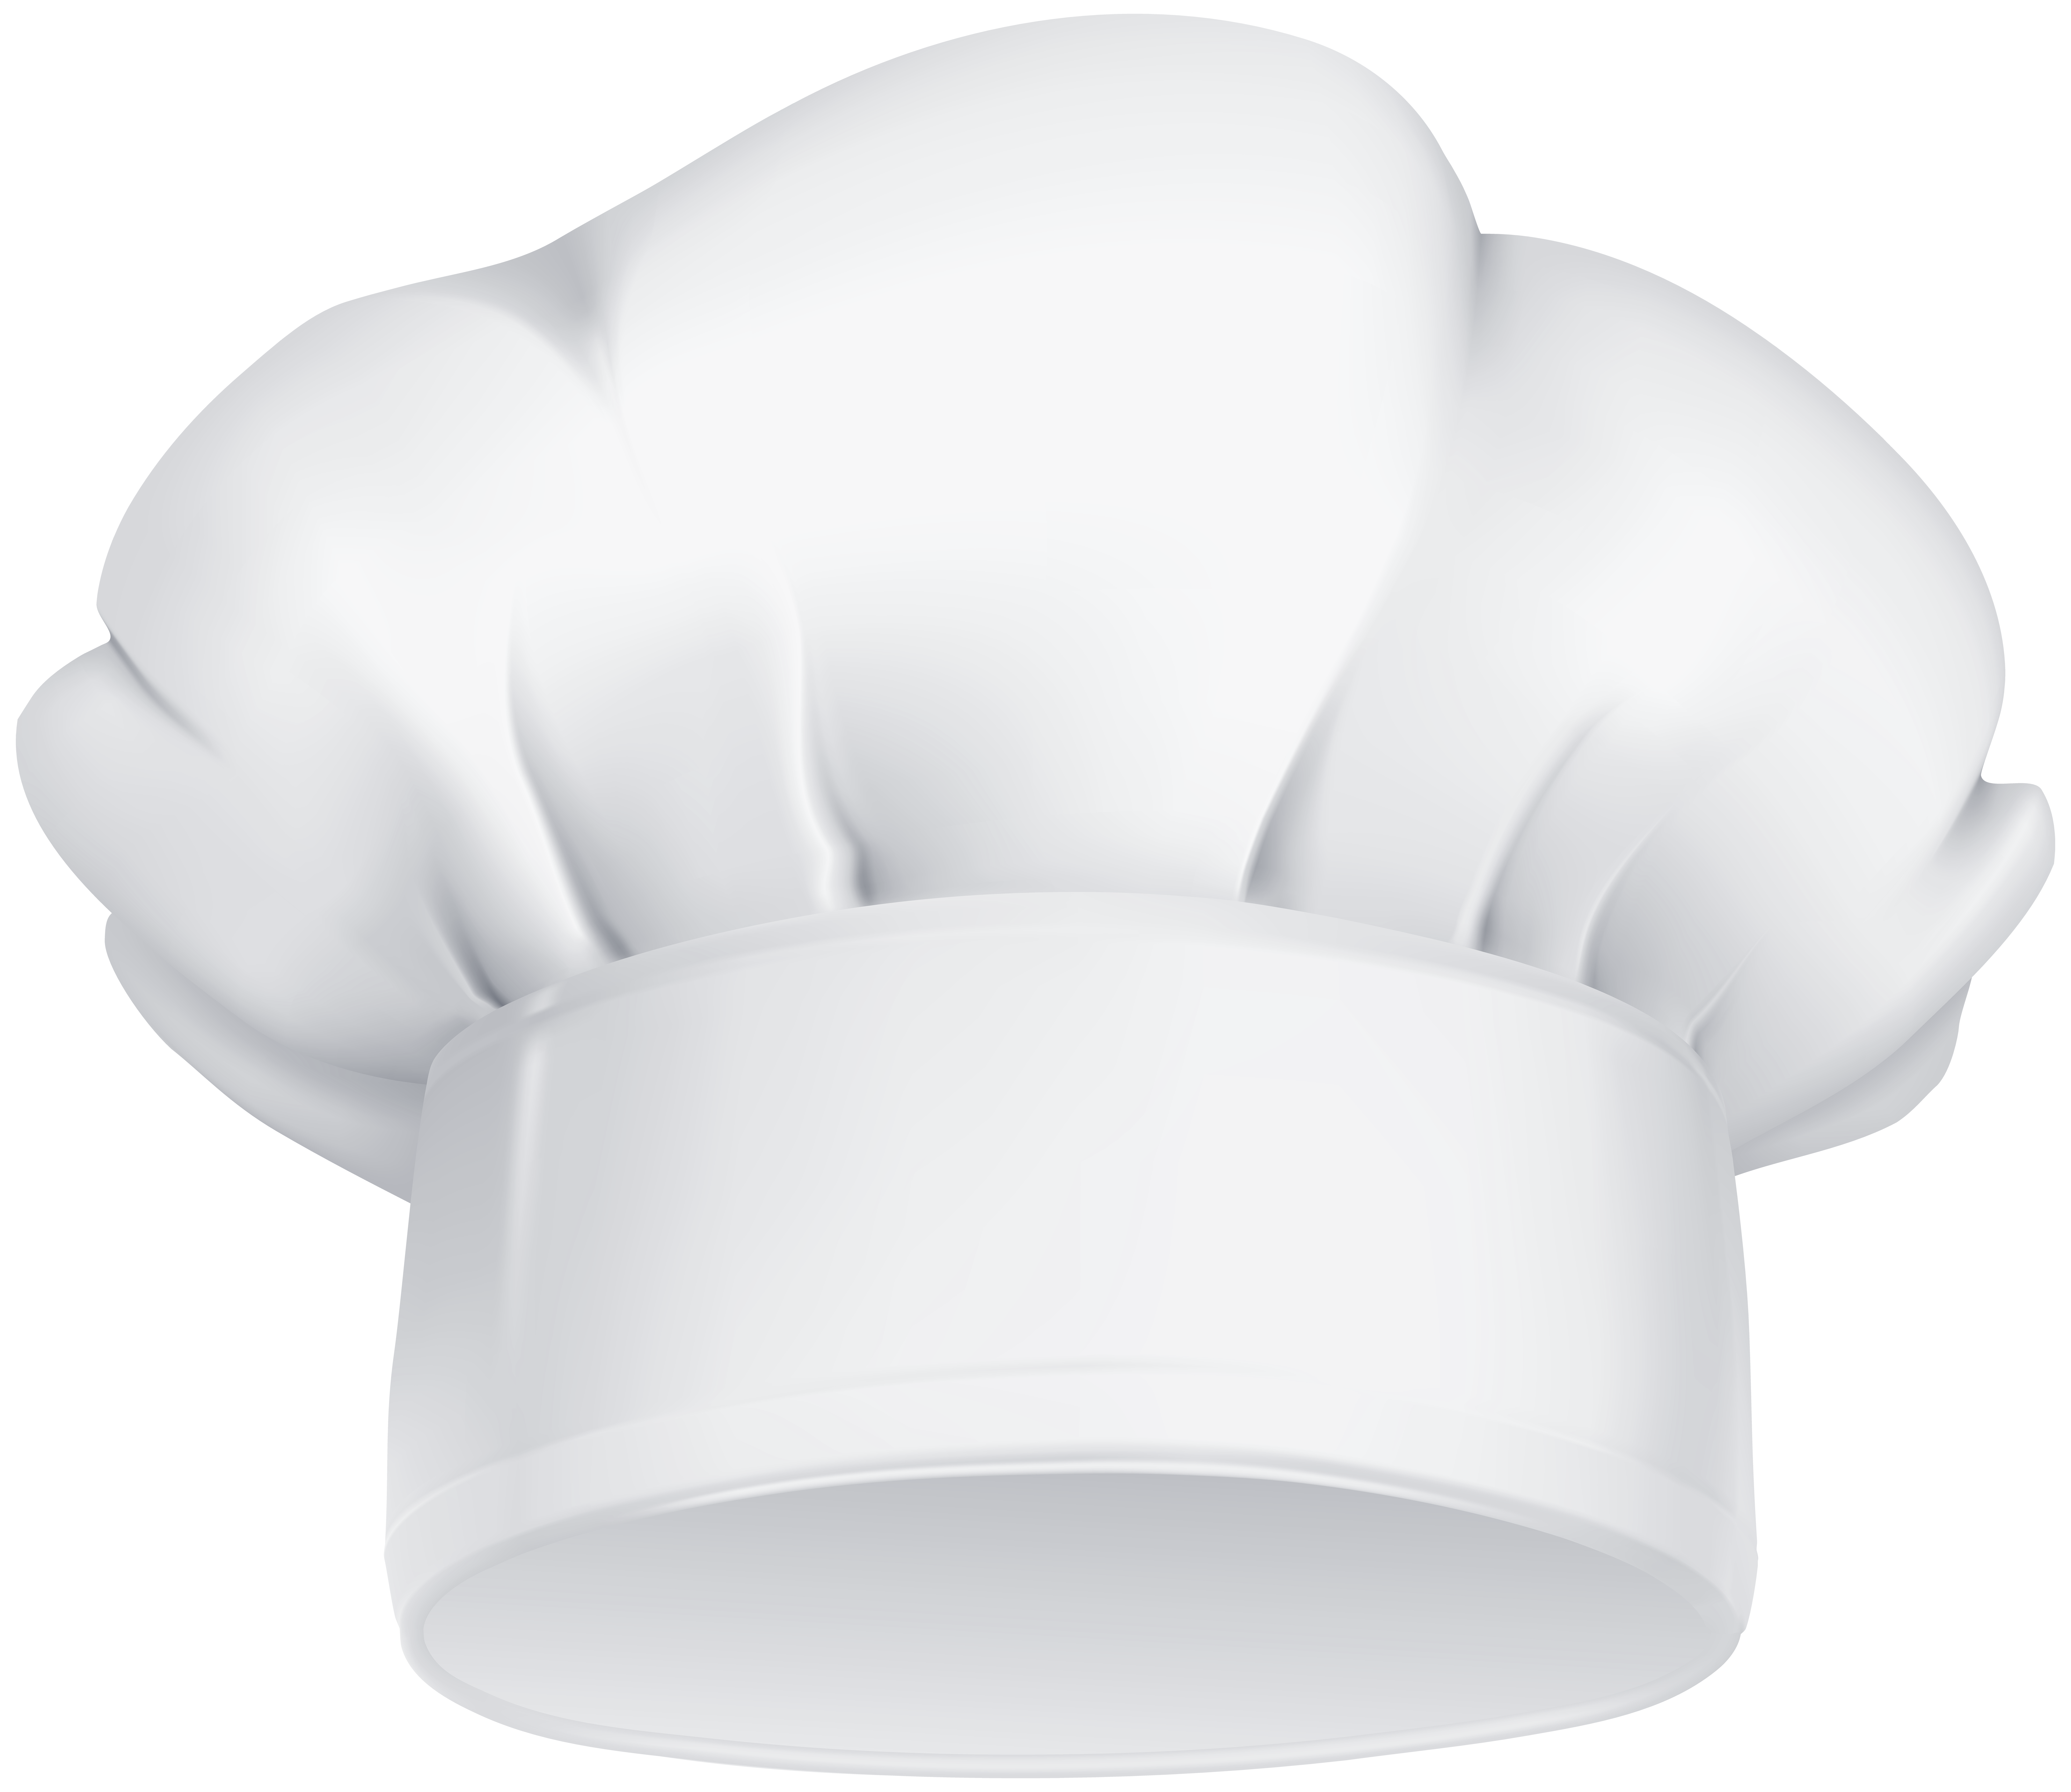 Chef Hat Download Free Image PNG Image